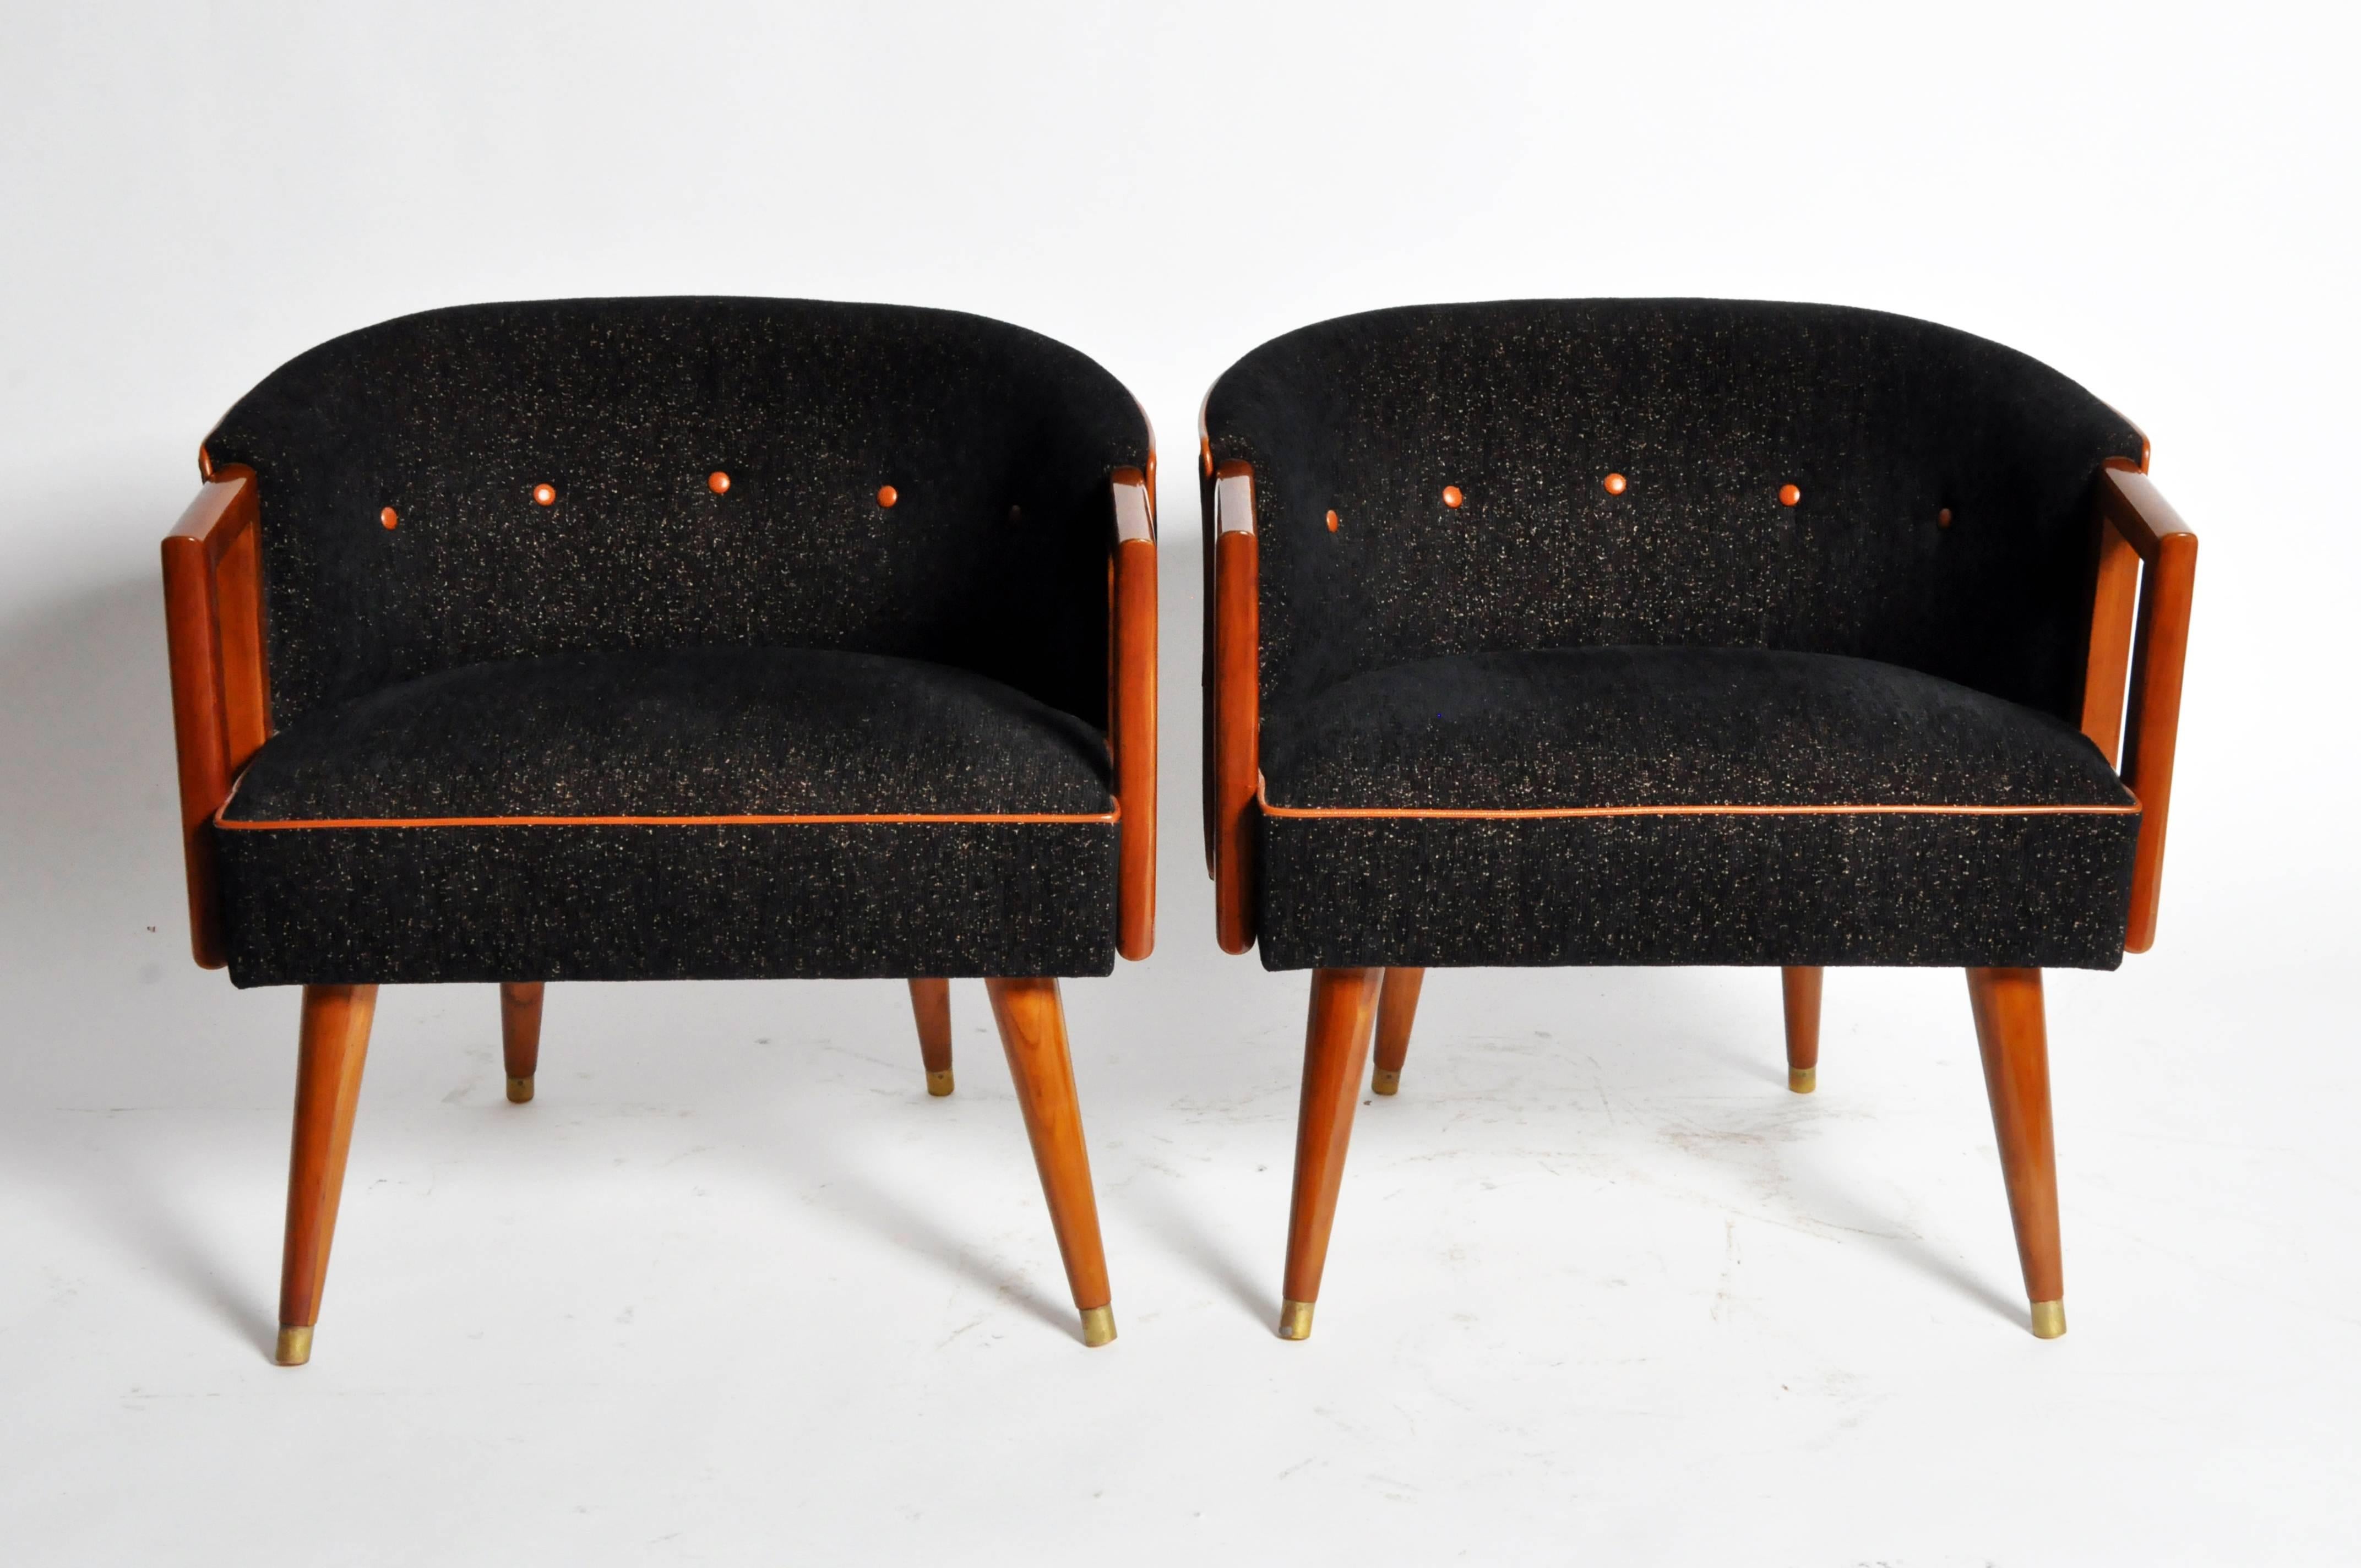 This handsome pair of round back chairs are from Italy and made from solid walnut, circa 1950.